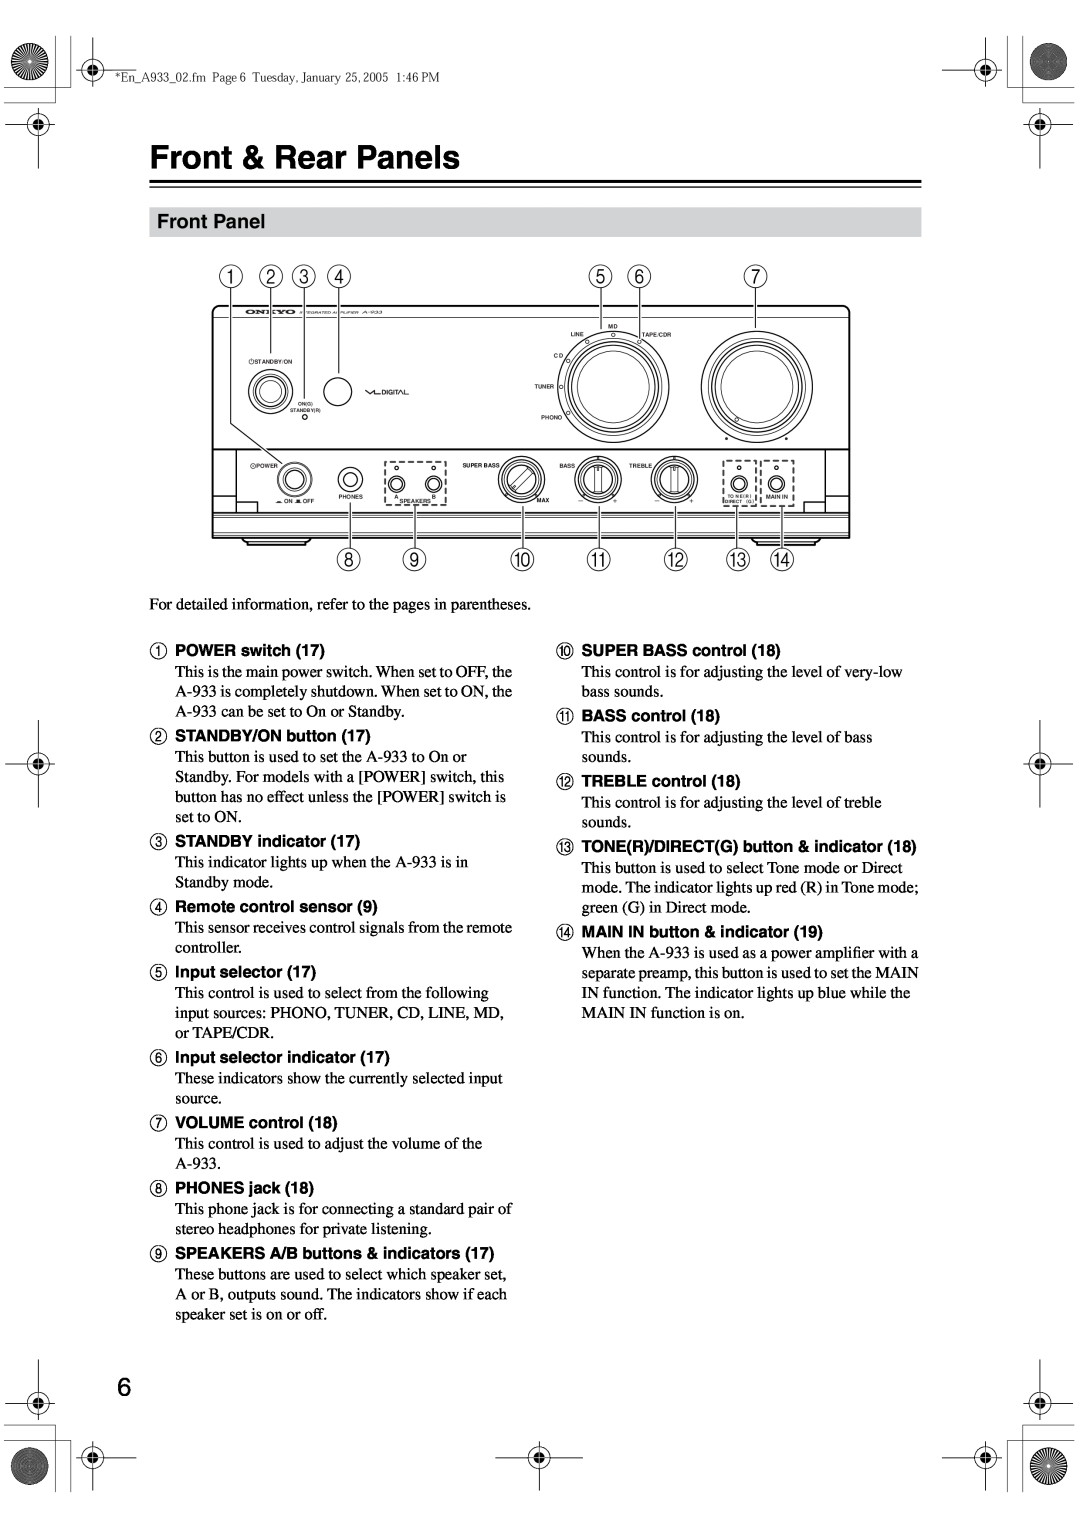 Onkyo A-933 instruction manual Front & Rear Panels, 8 9 0 A B C D, Front Panel 